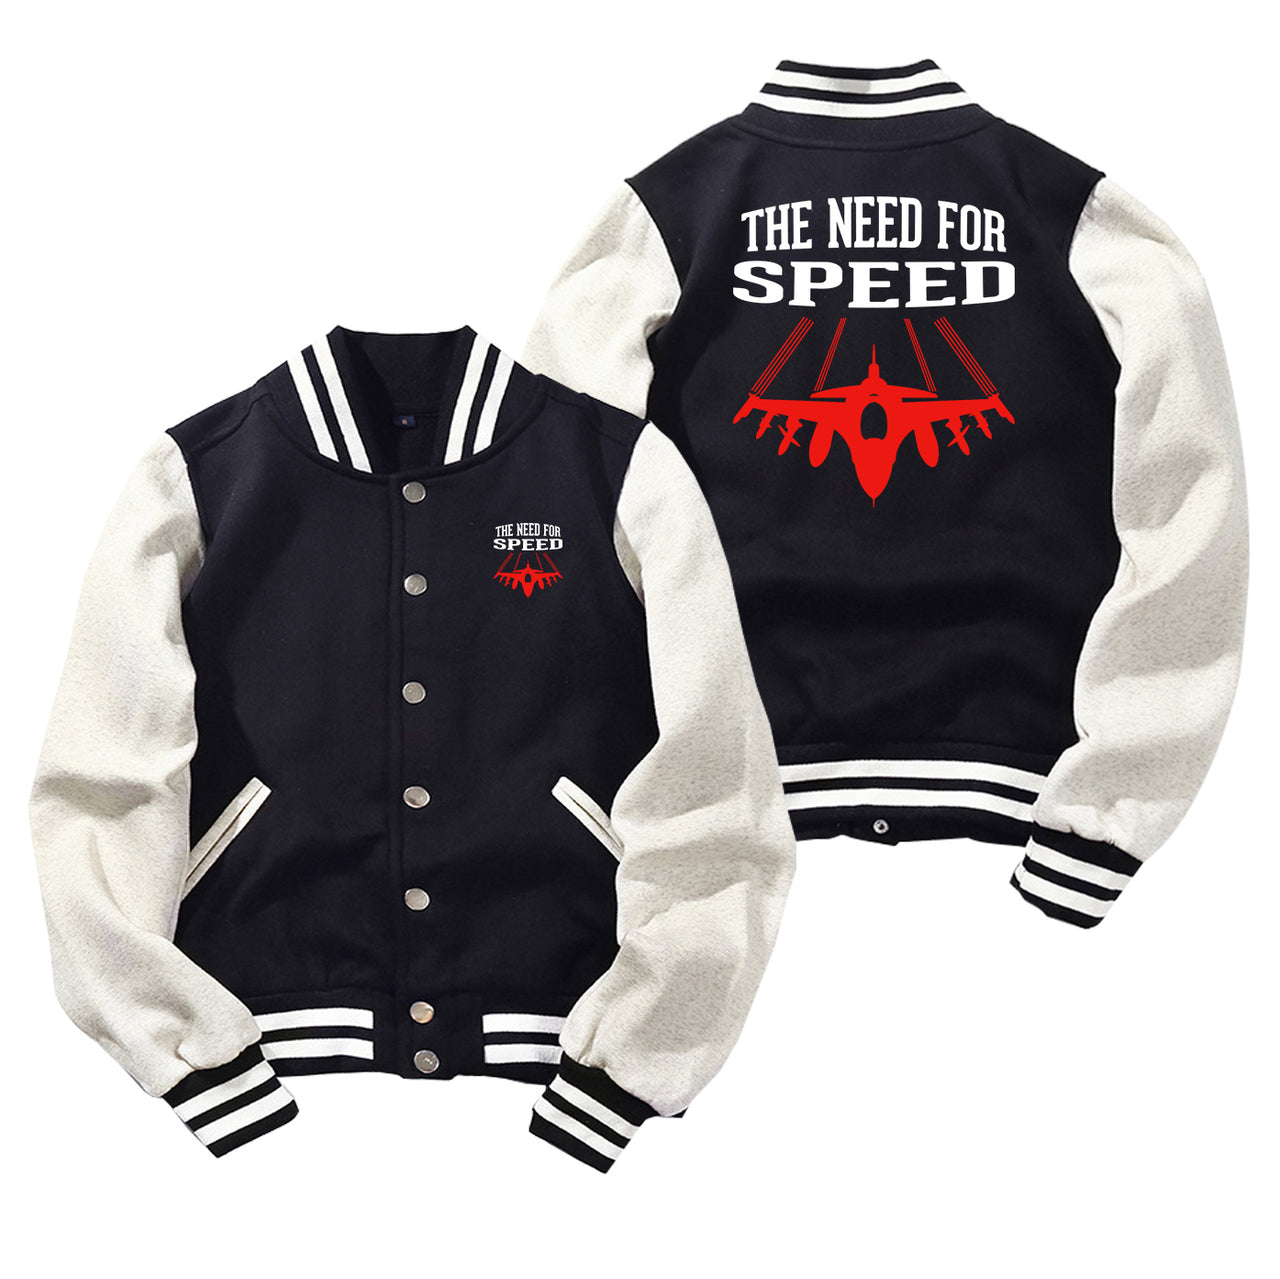 The Need For Speed Designed Baseball Style Jackets